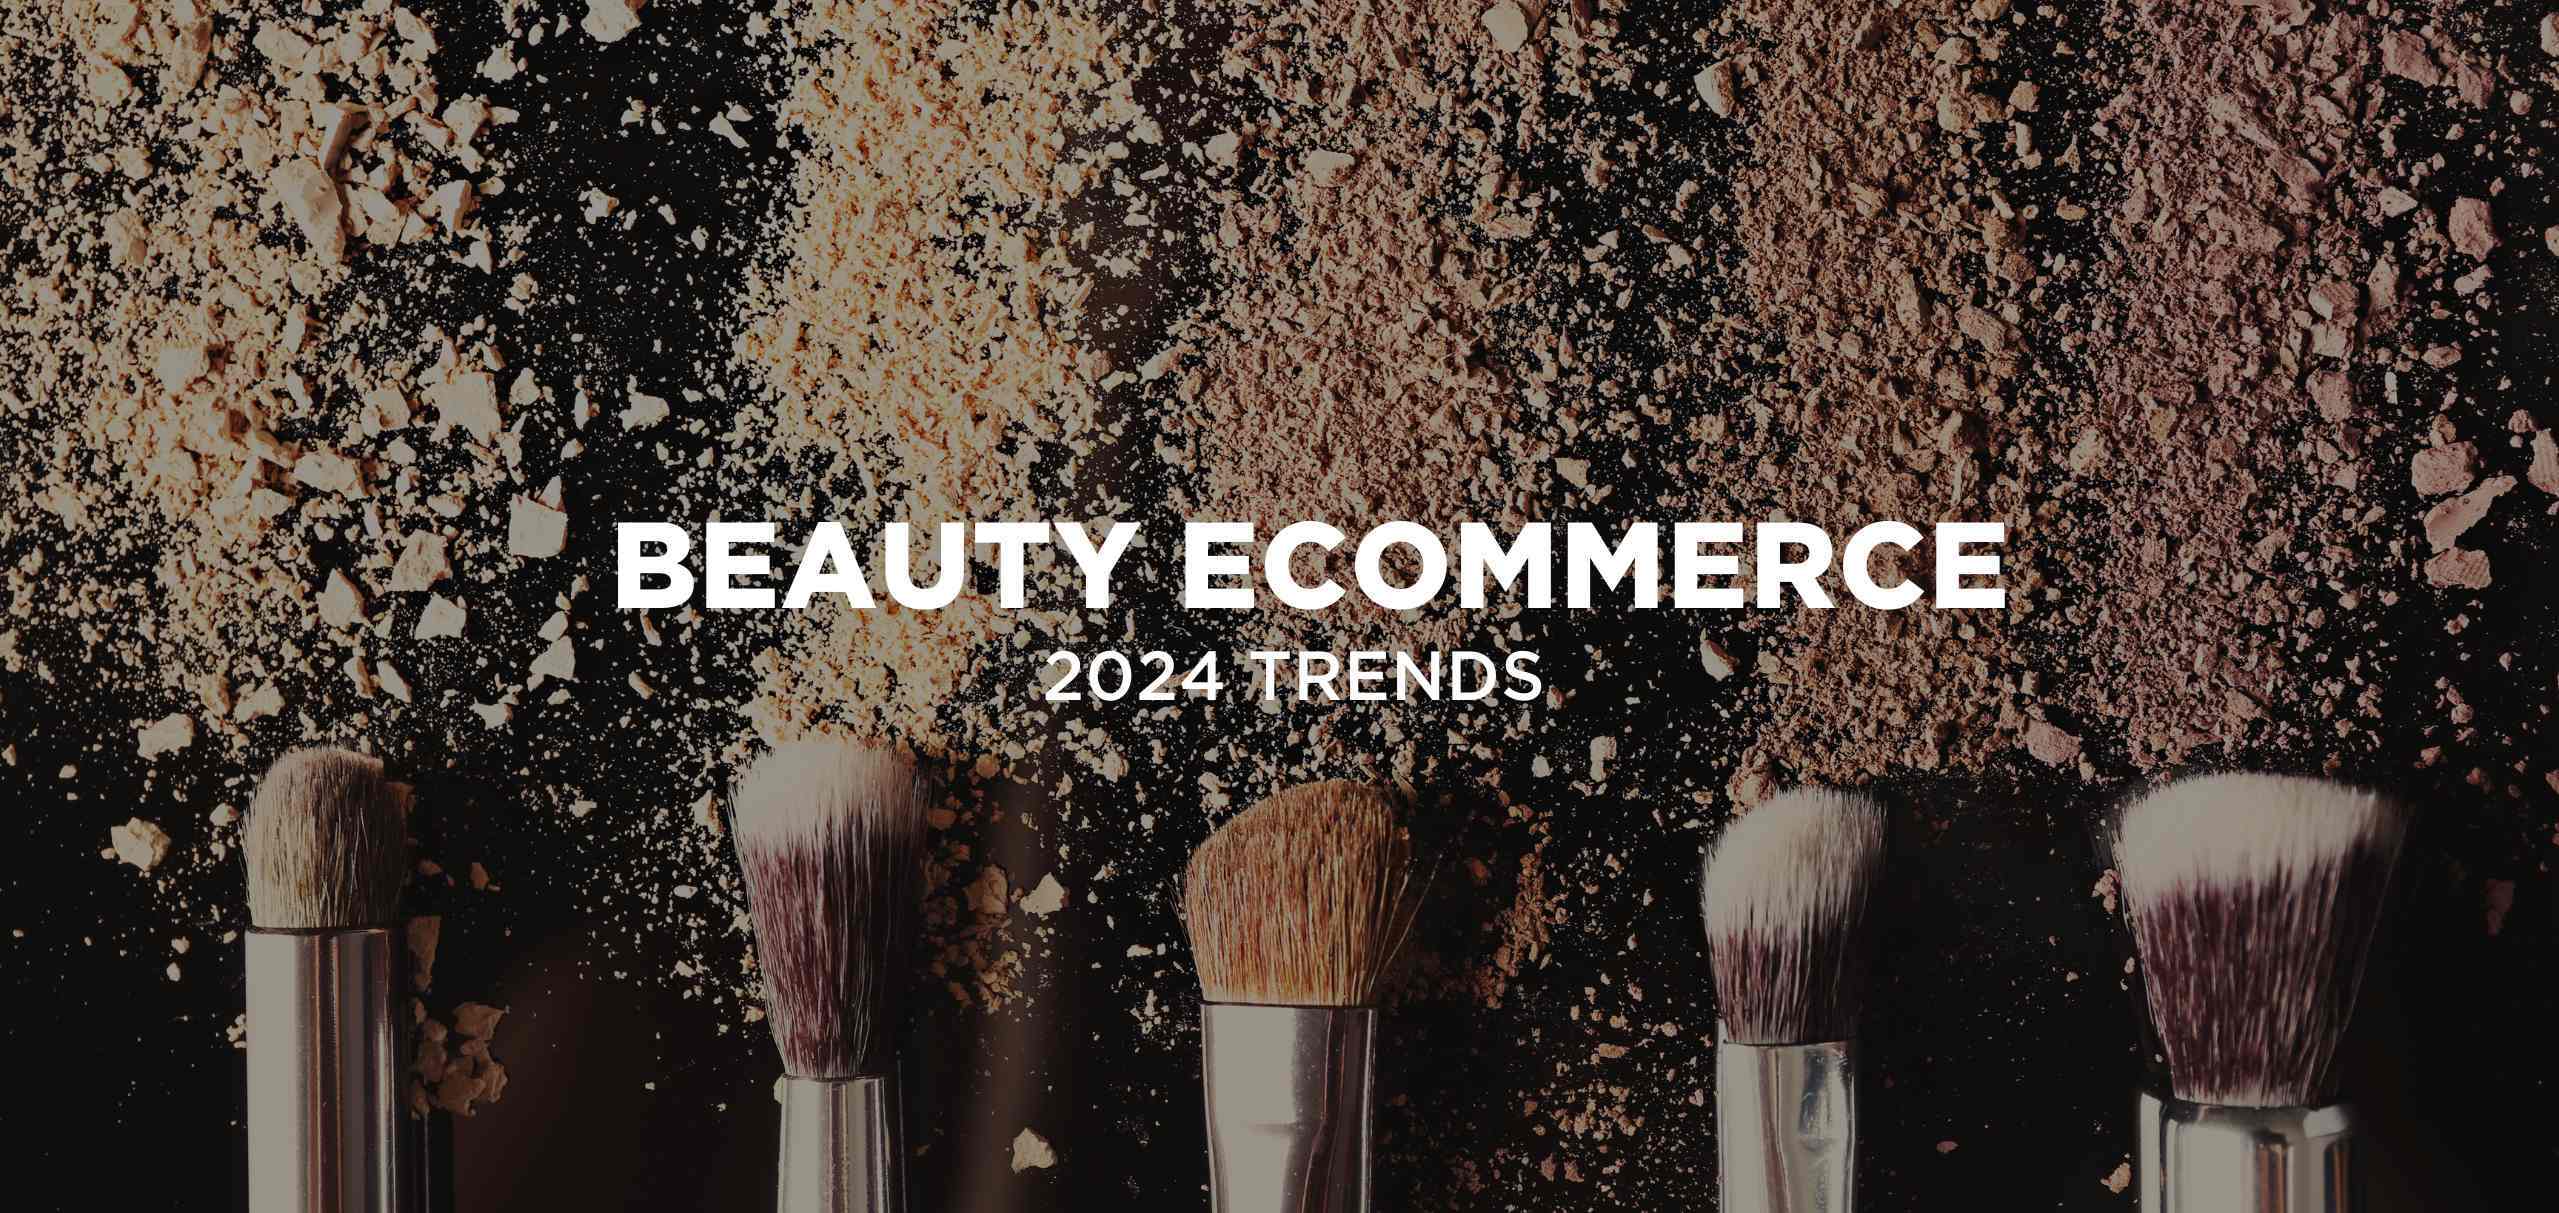 Beauty Ecommerce Trends in 2024